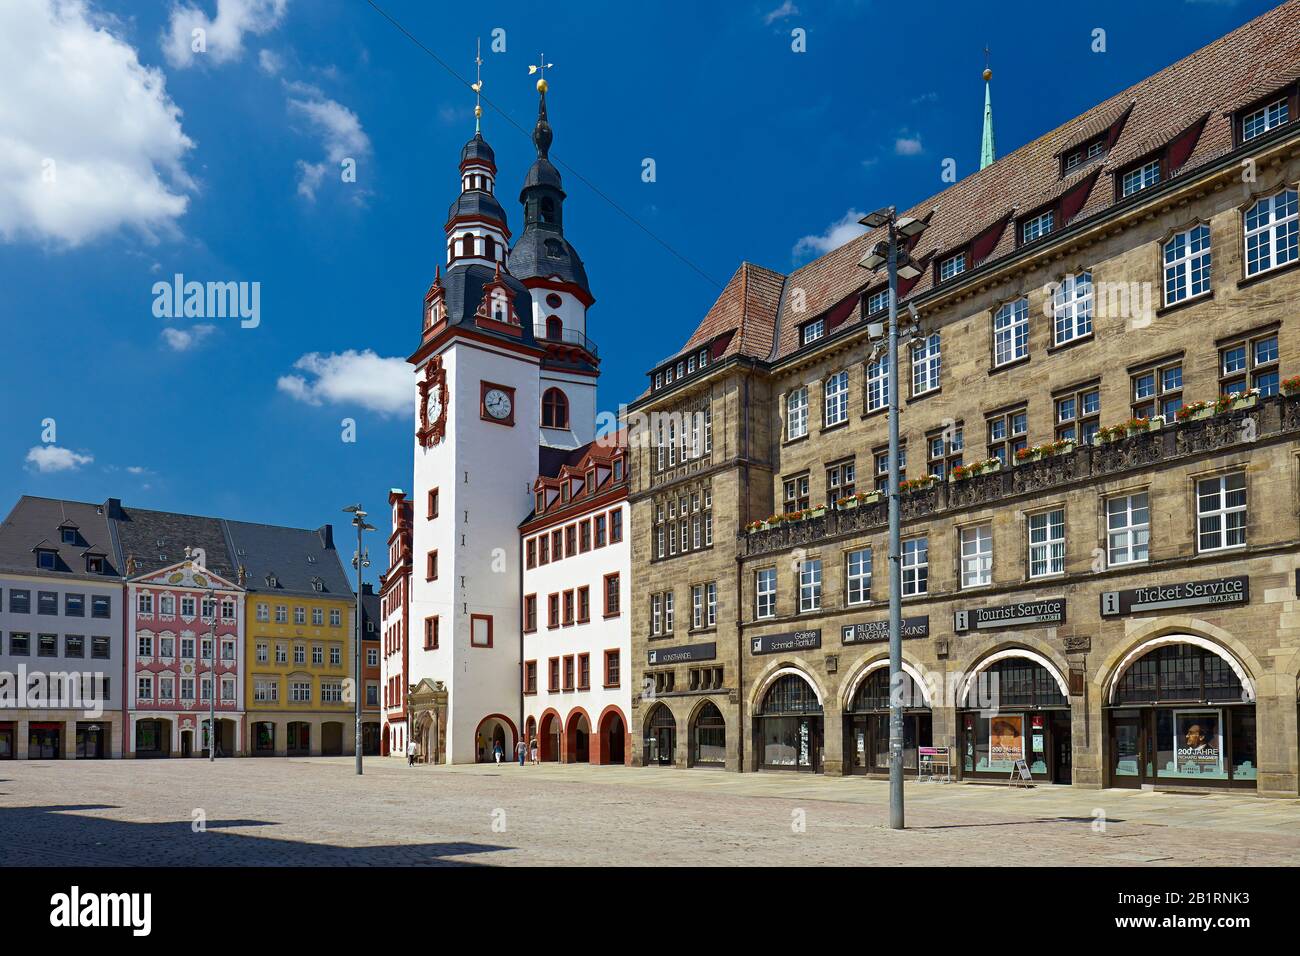 Market with old and new town hall, St. Jakobi town church in Chemnitz, Saxony, Germany, Stock Photo